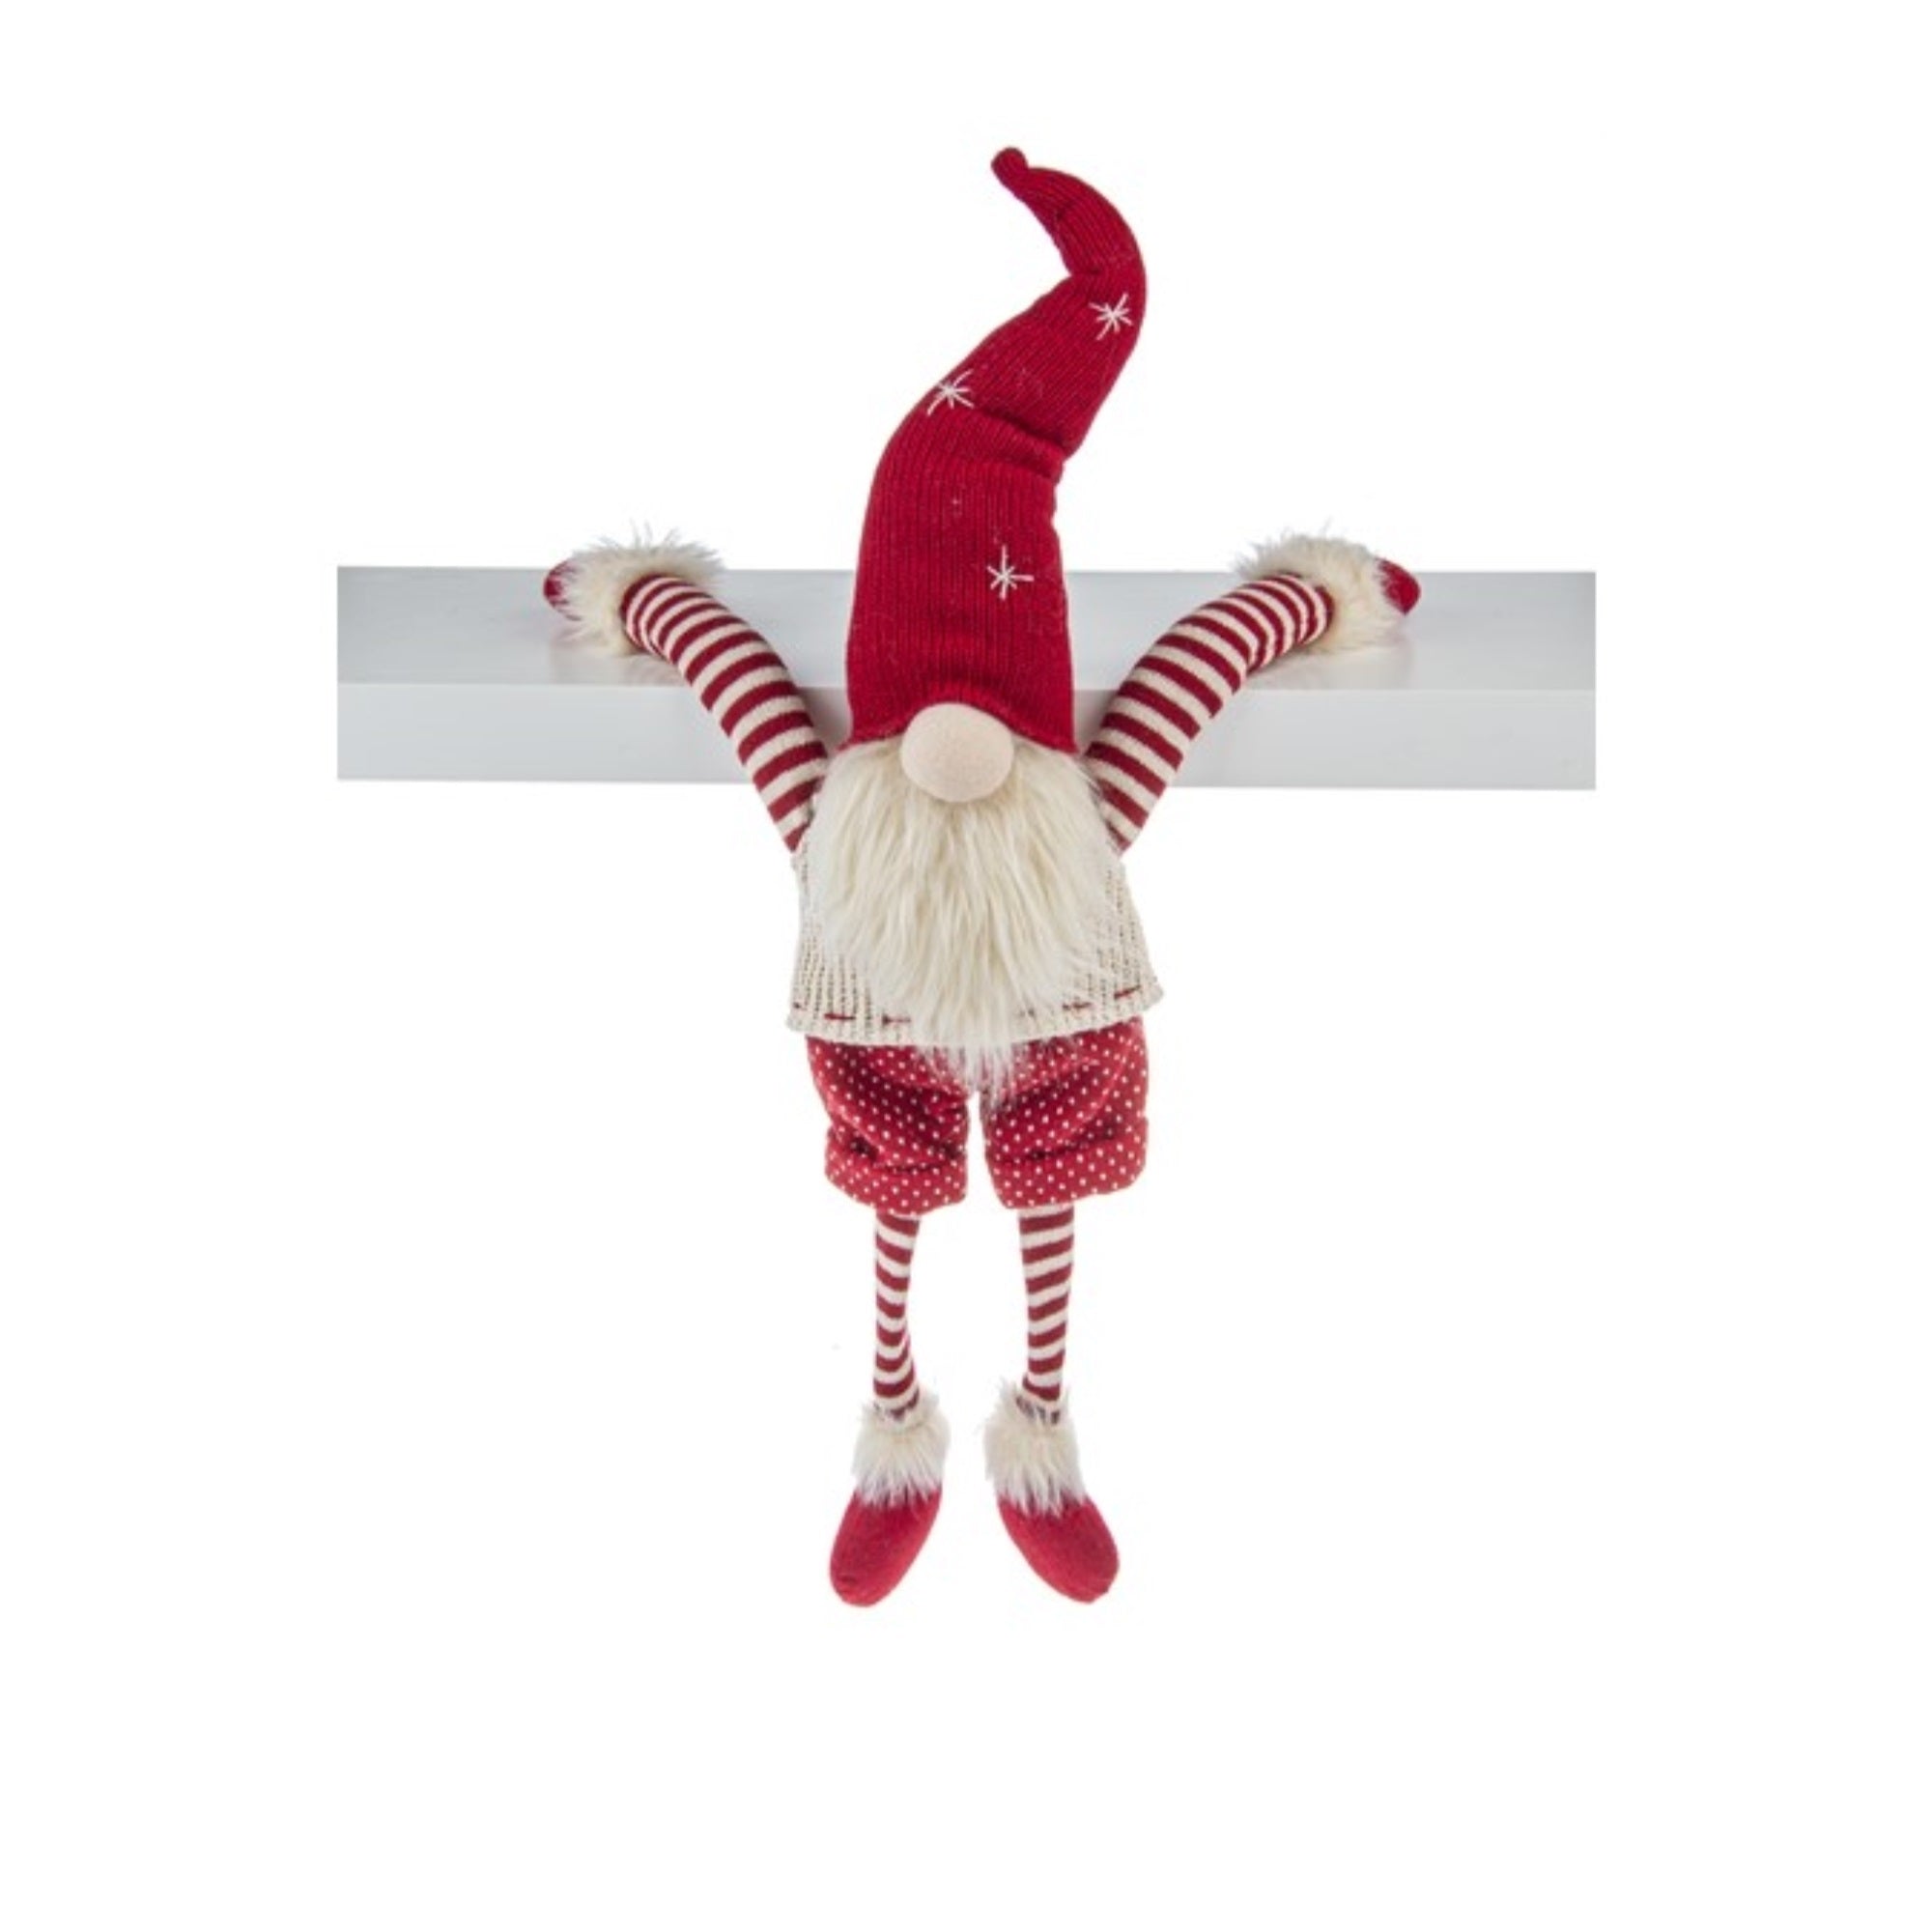 Ganz Hanging, Or Sitting Gnome Figurine Christmas Decoration, Red and White, 32"